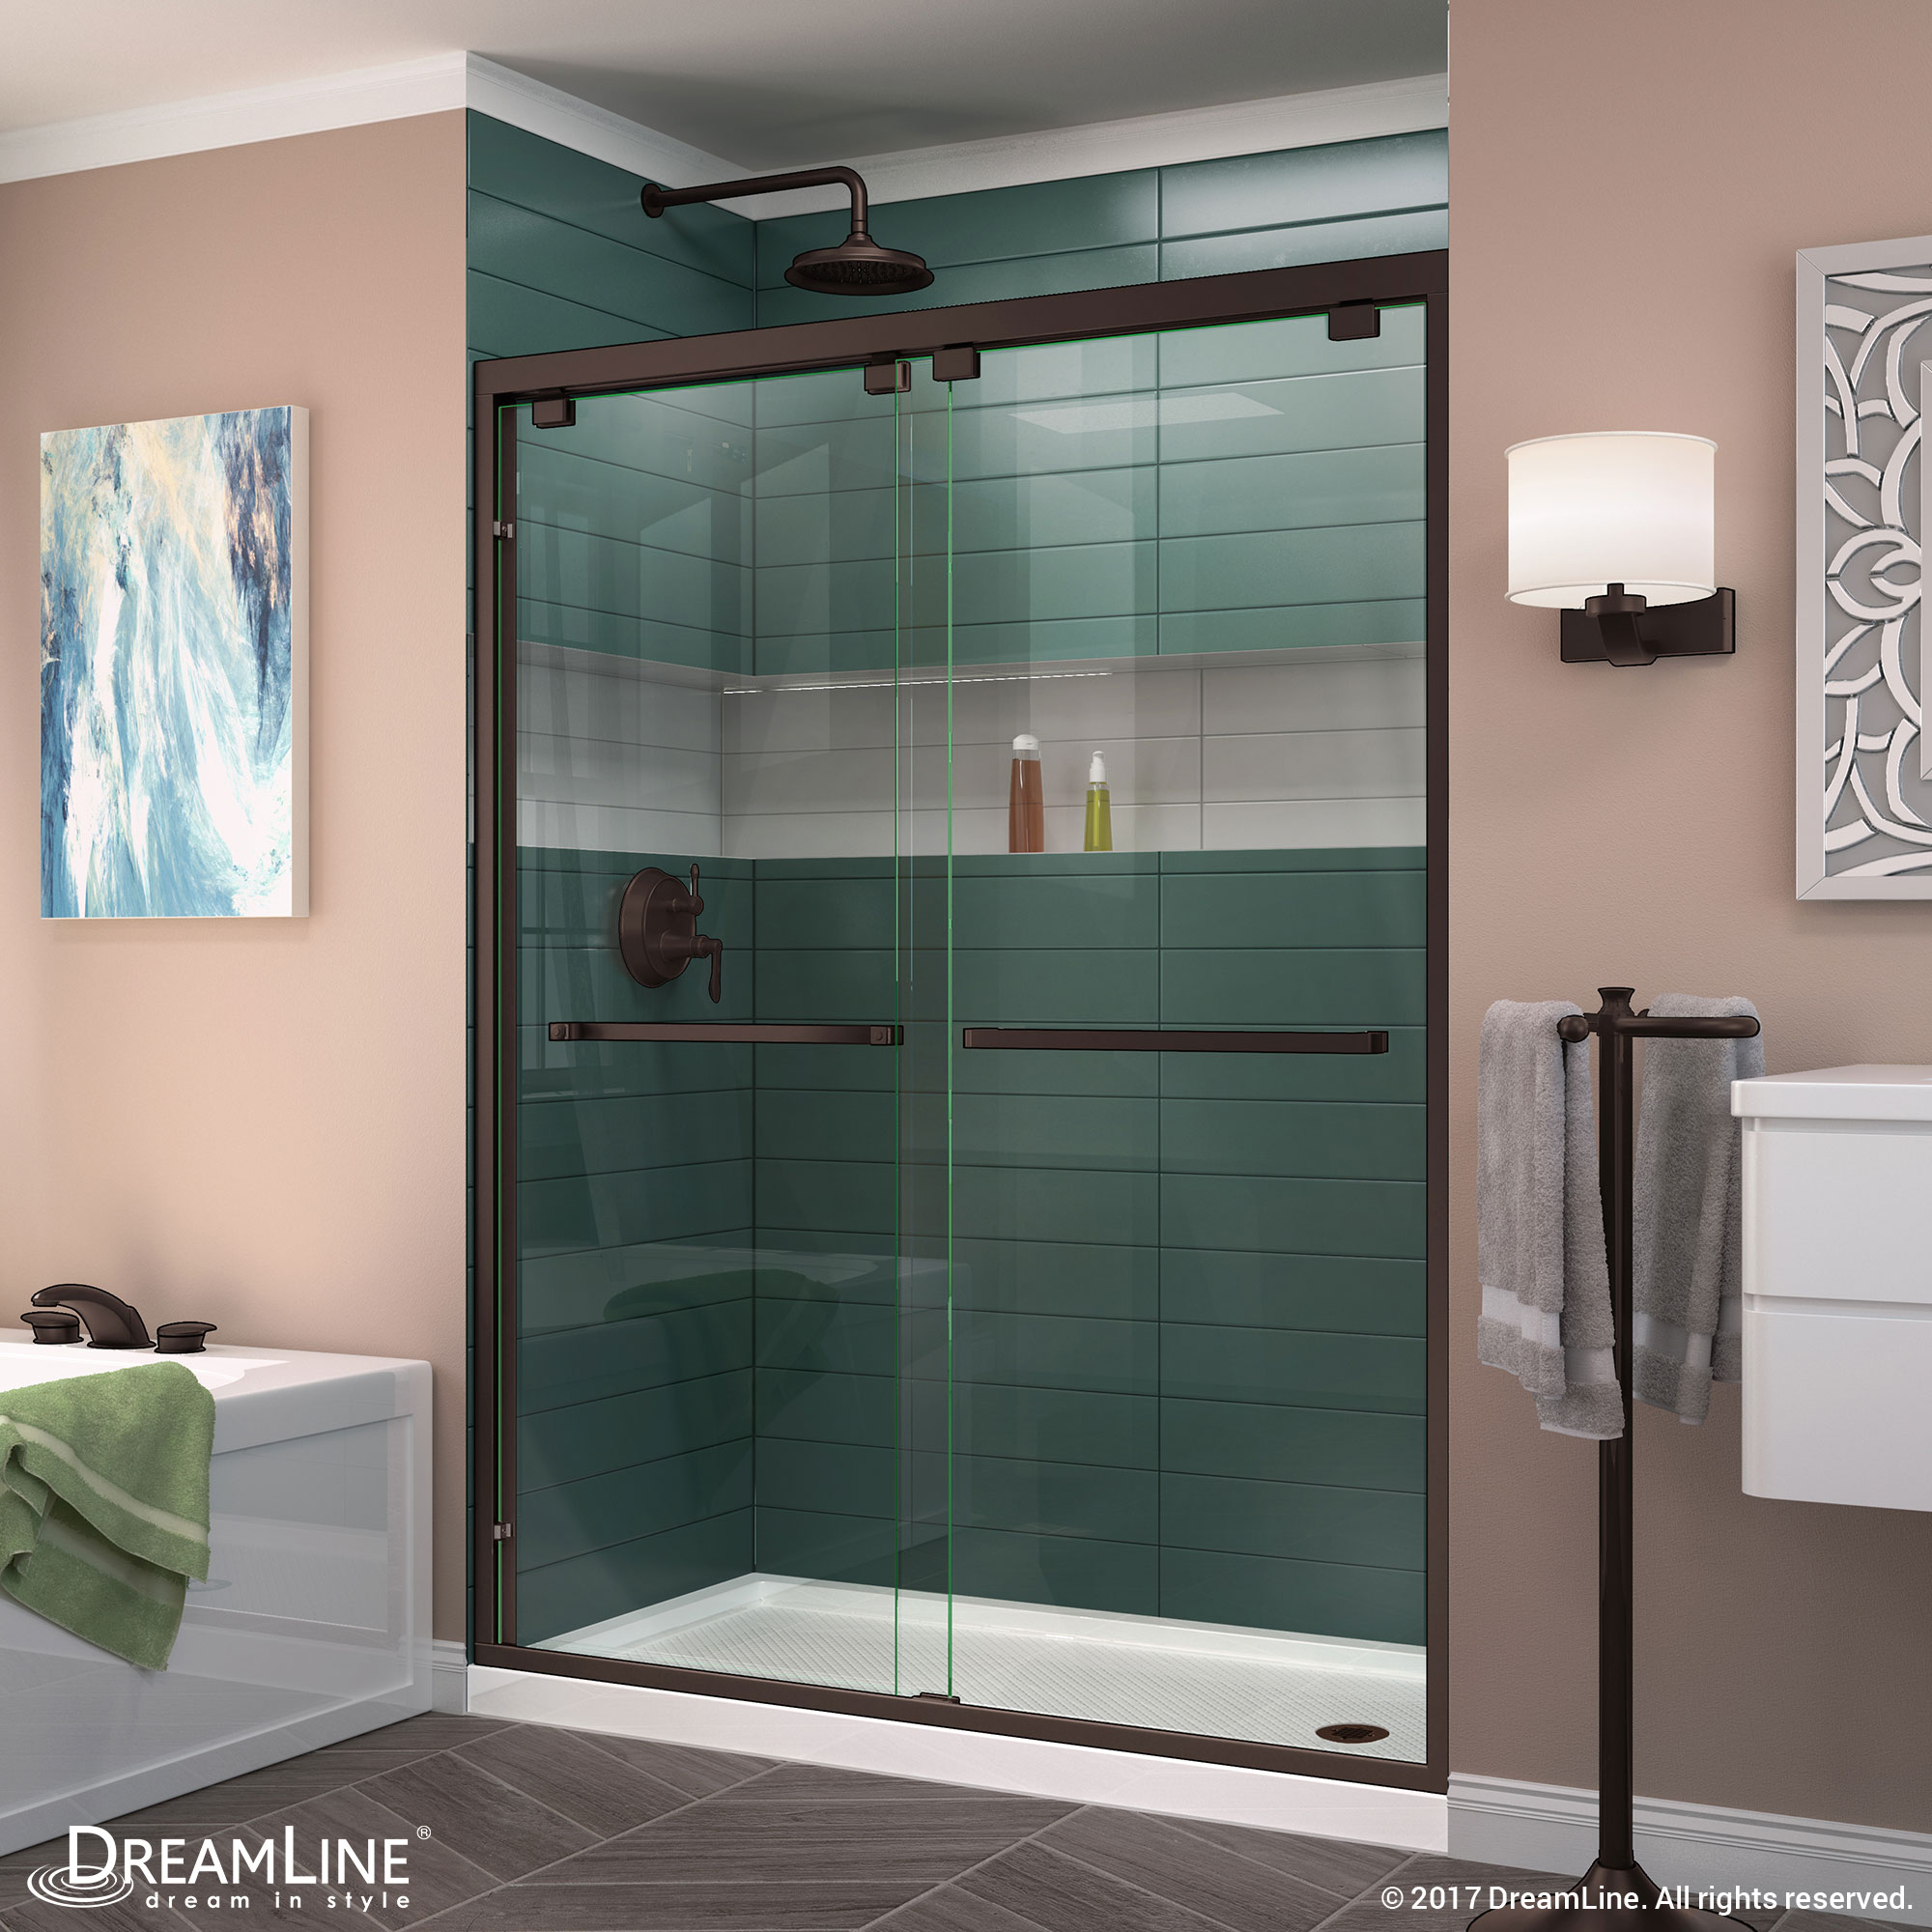 DreamLine Encore 32 in. D x 48 in. W x 78 3/4 in. H Bypass Shower Door in Brushed Nickel and Center Drain Biscuit Base Kit